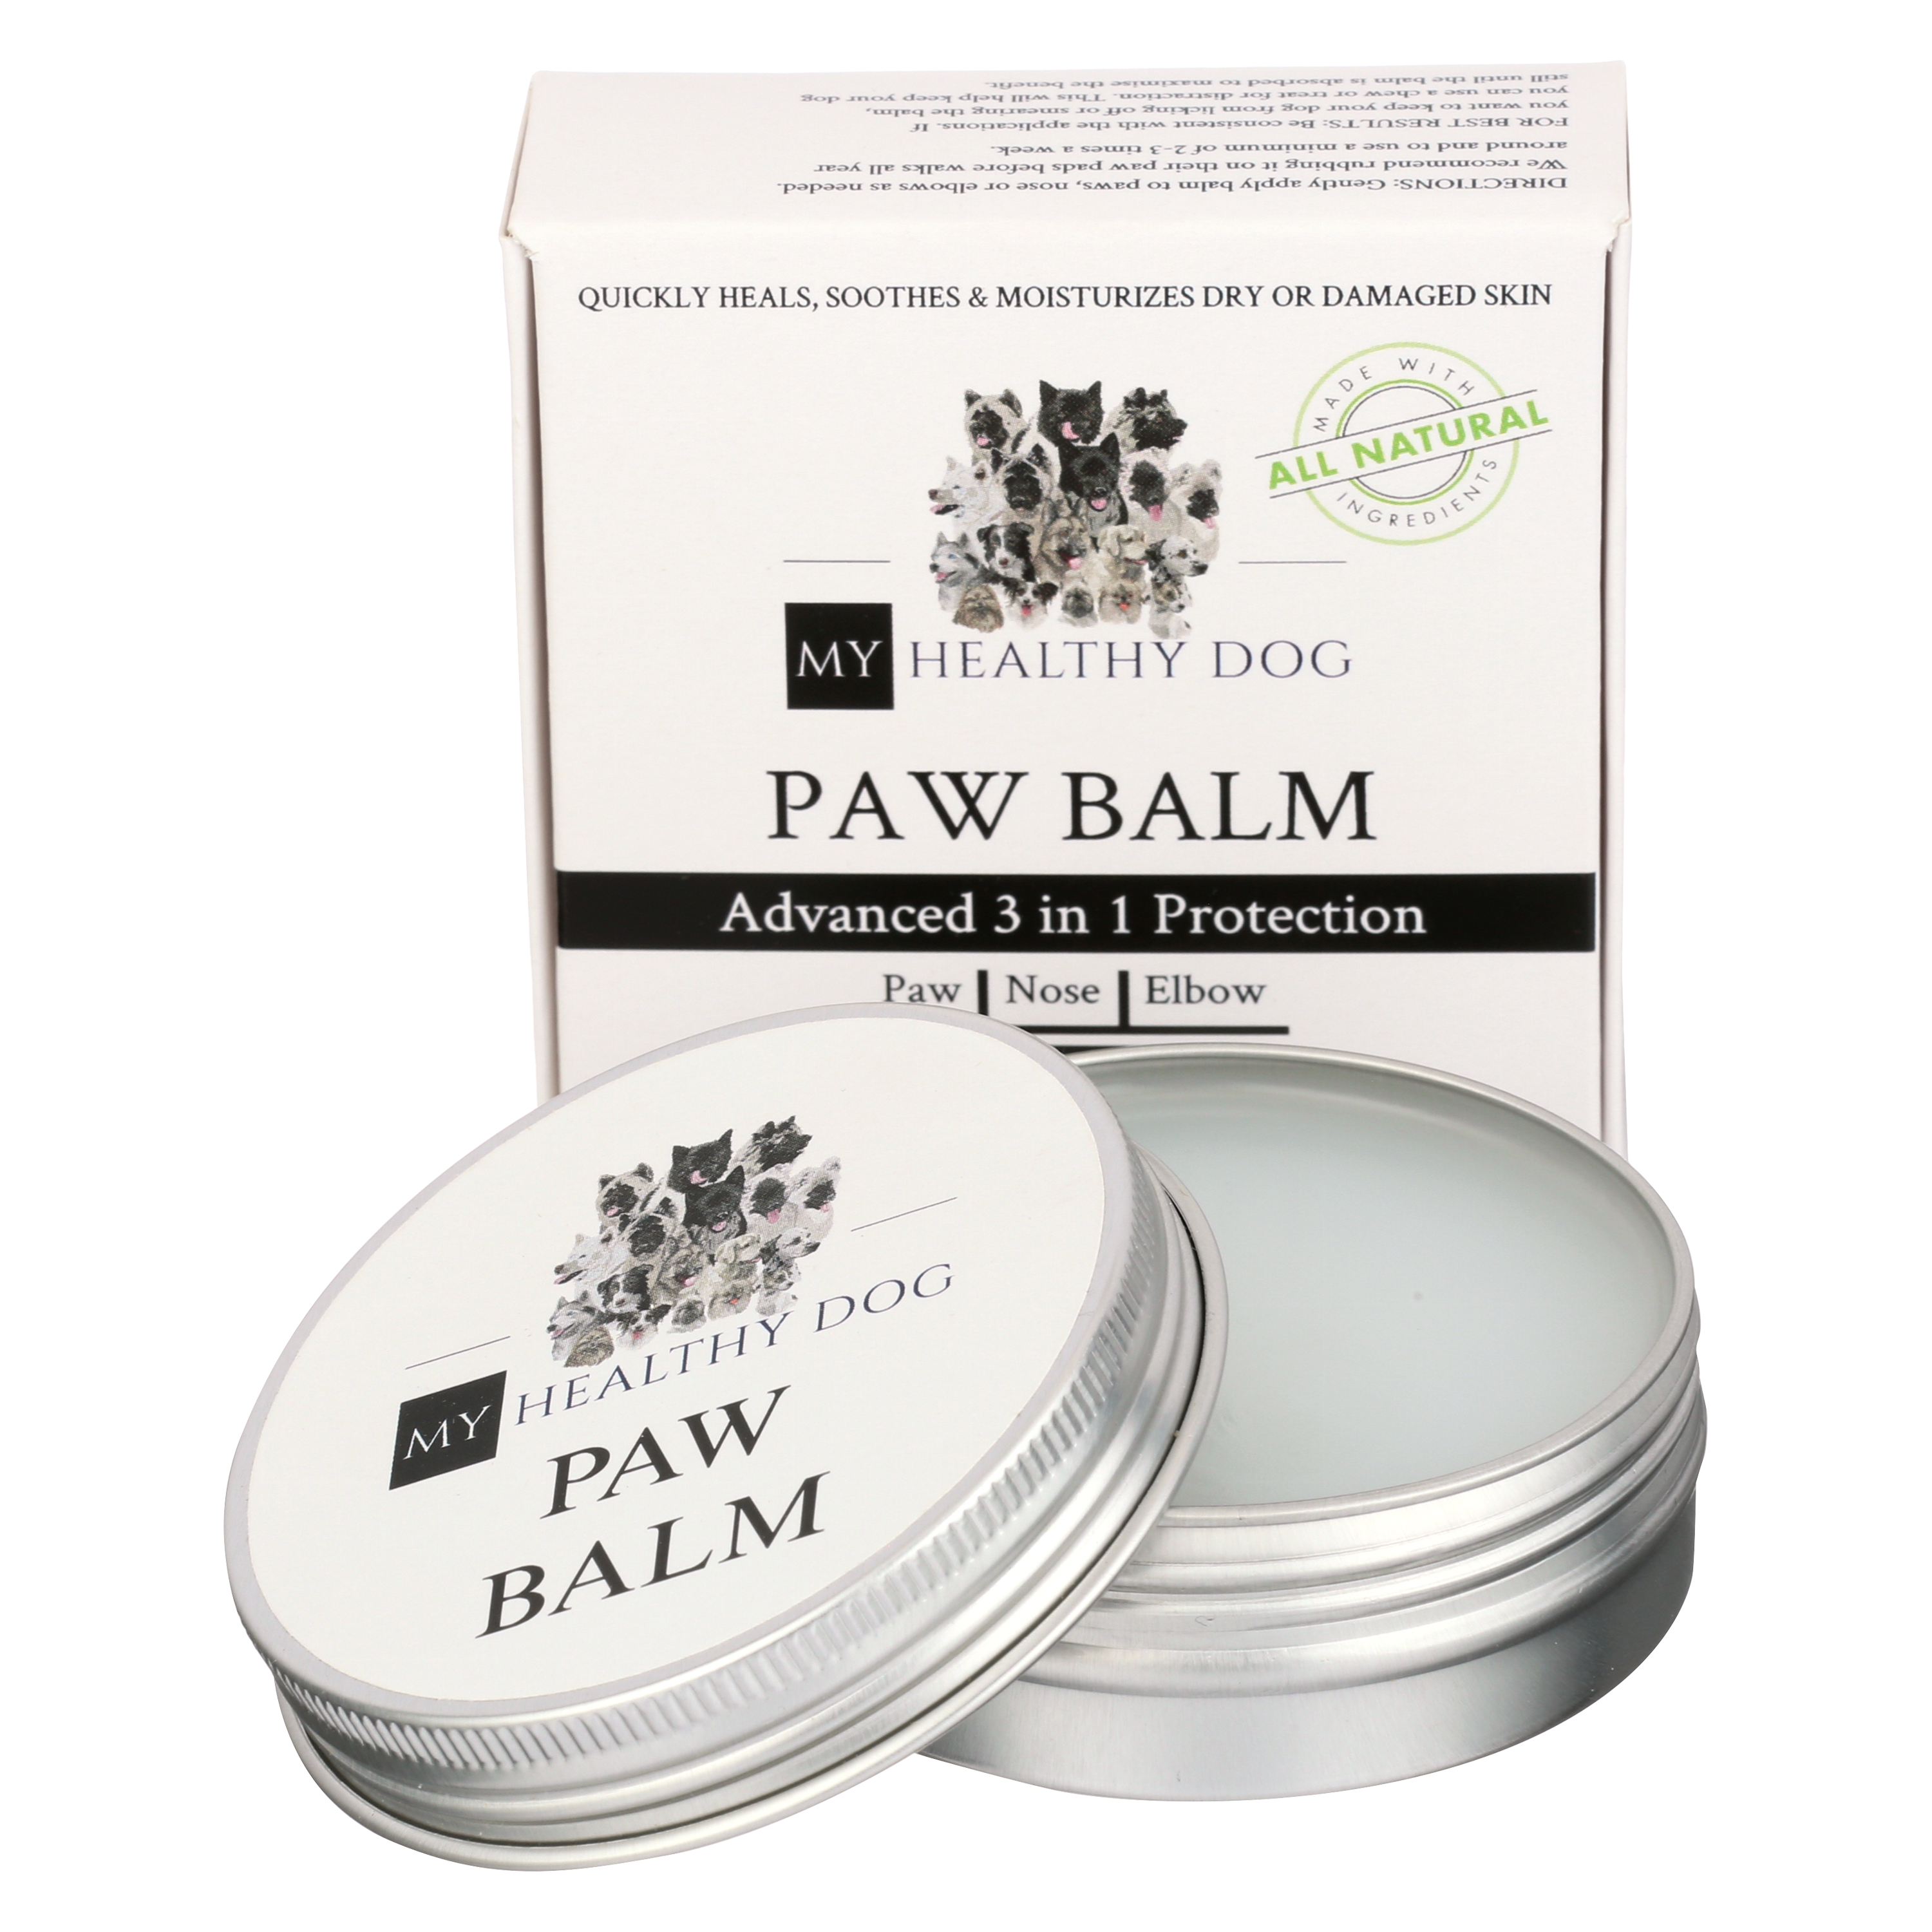 Just like a warrior's shield, our paw balm protects your pet's paws from harsh environmental conditions, such as hot pavement or icy sidewalks. Enriched with healing agents, it also soothes and repairs damaged pads, offering relief from the discomfort of cracks and rough patches.